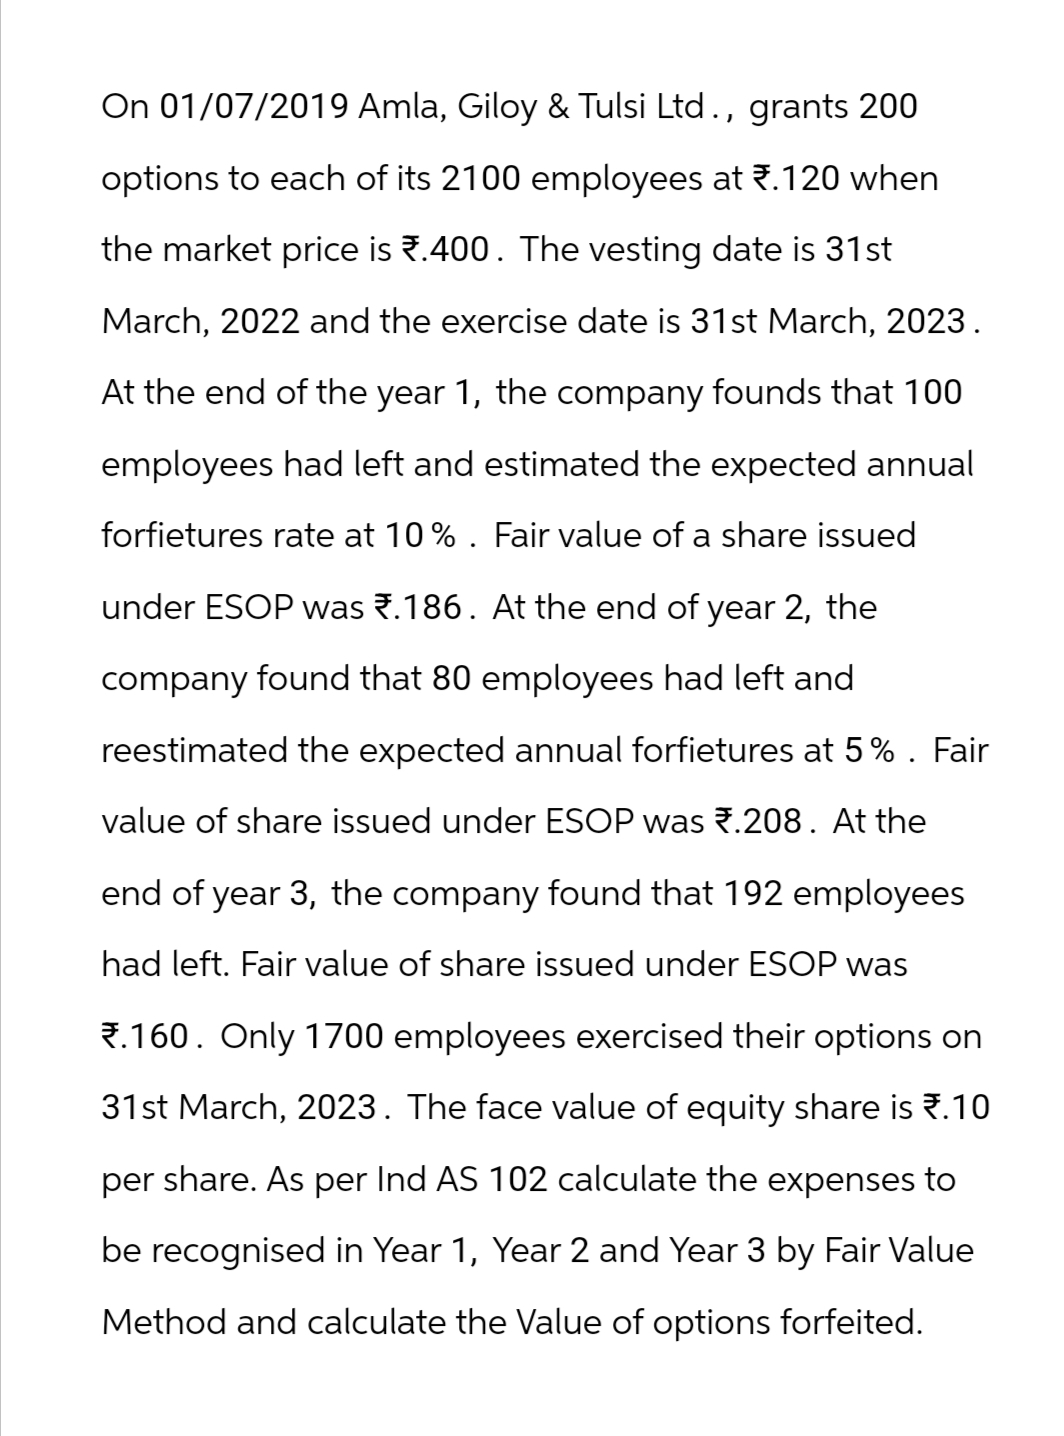 On 01/07/2019 Amla, Giloy & Tulsi Ltd., grants 200
options to each of its 2100 employees at ₹.120 when
the market price is ₹.400. The vesting date is 31st
March, 2022 and the exercise date is 31st March, 2023.
At the end of the year 1, the company founds that 100
employees had left and estimated the expected annual
forfietures rate at 10%. Fair value of a share issued
under ESOP was ₹.186. At the end of year 2, the
company found that 80 employees had left and
reestimated the expected annual forfietures at 5%. Fair
value of share issued under ESOP was 7.208. At the
end of year 3, the company found that 192 employees
had left. Fair value of share issued under ESOP was
.160. Only 1700 employees exercised their options on
31st March, 2023. The face value of equity share is *.10
per share. As per Ind AS 102 calculate the expenses to
be recognised in Year 1, Year 2 and Year 3 by Fair Value
Method and calculate the Value of options forfeited.